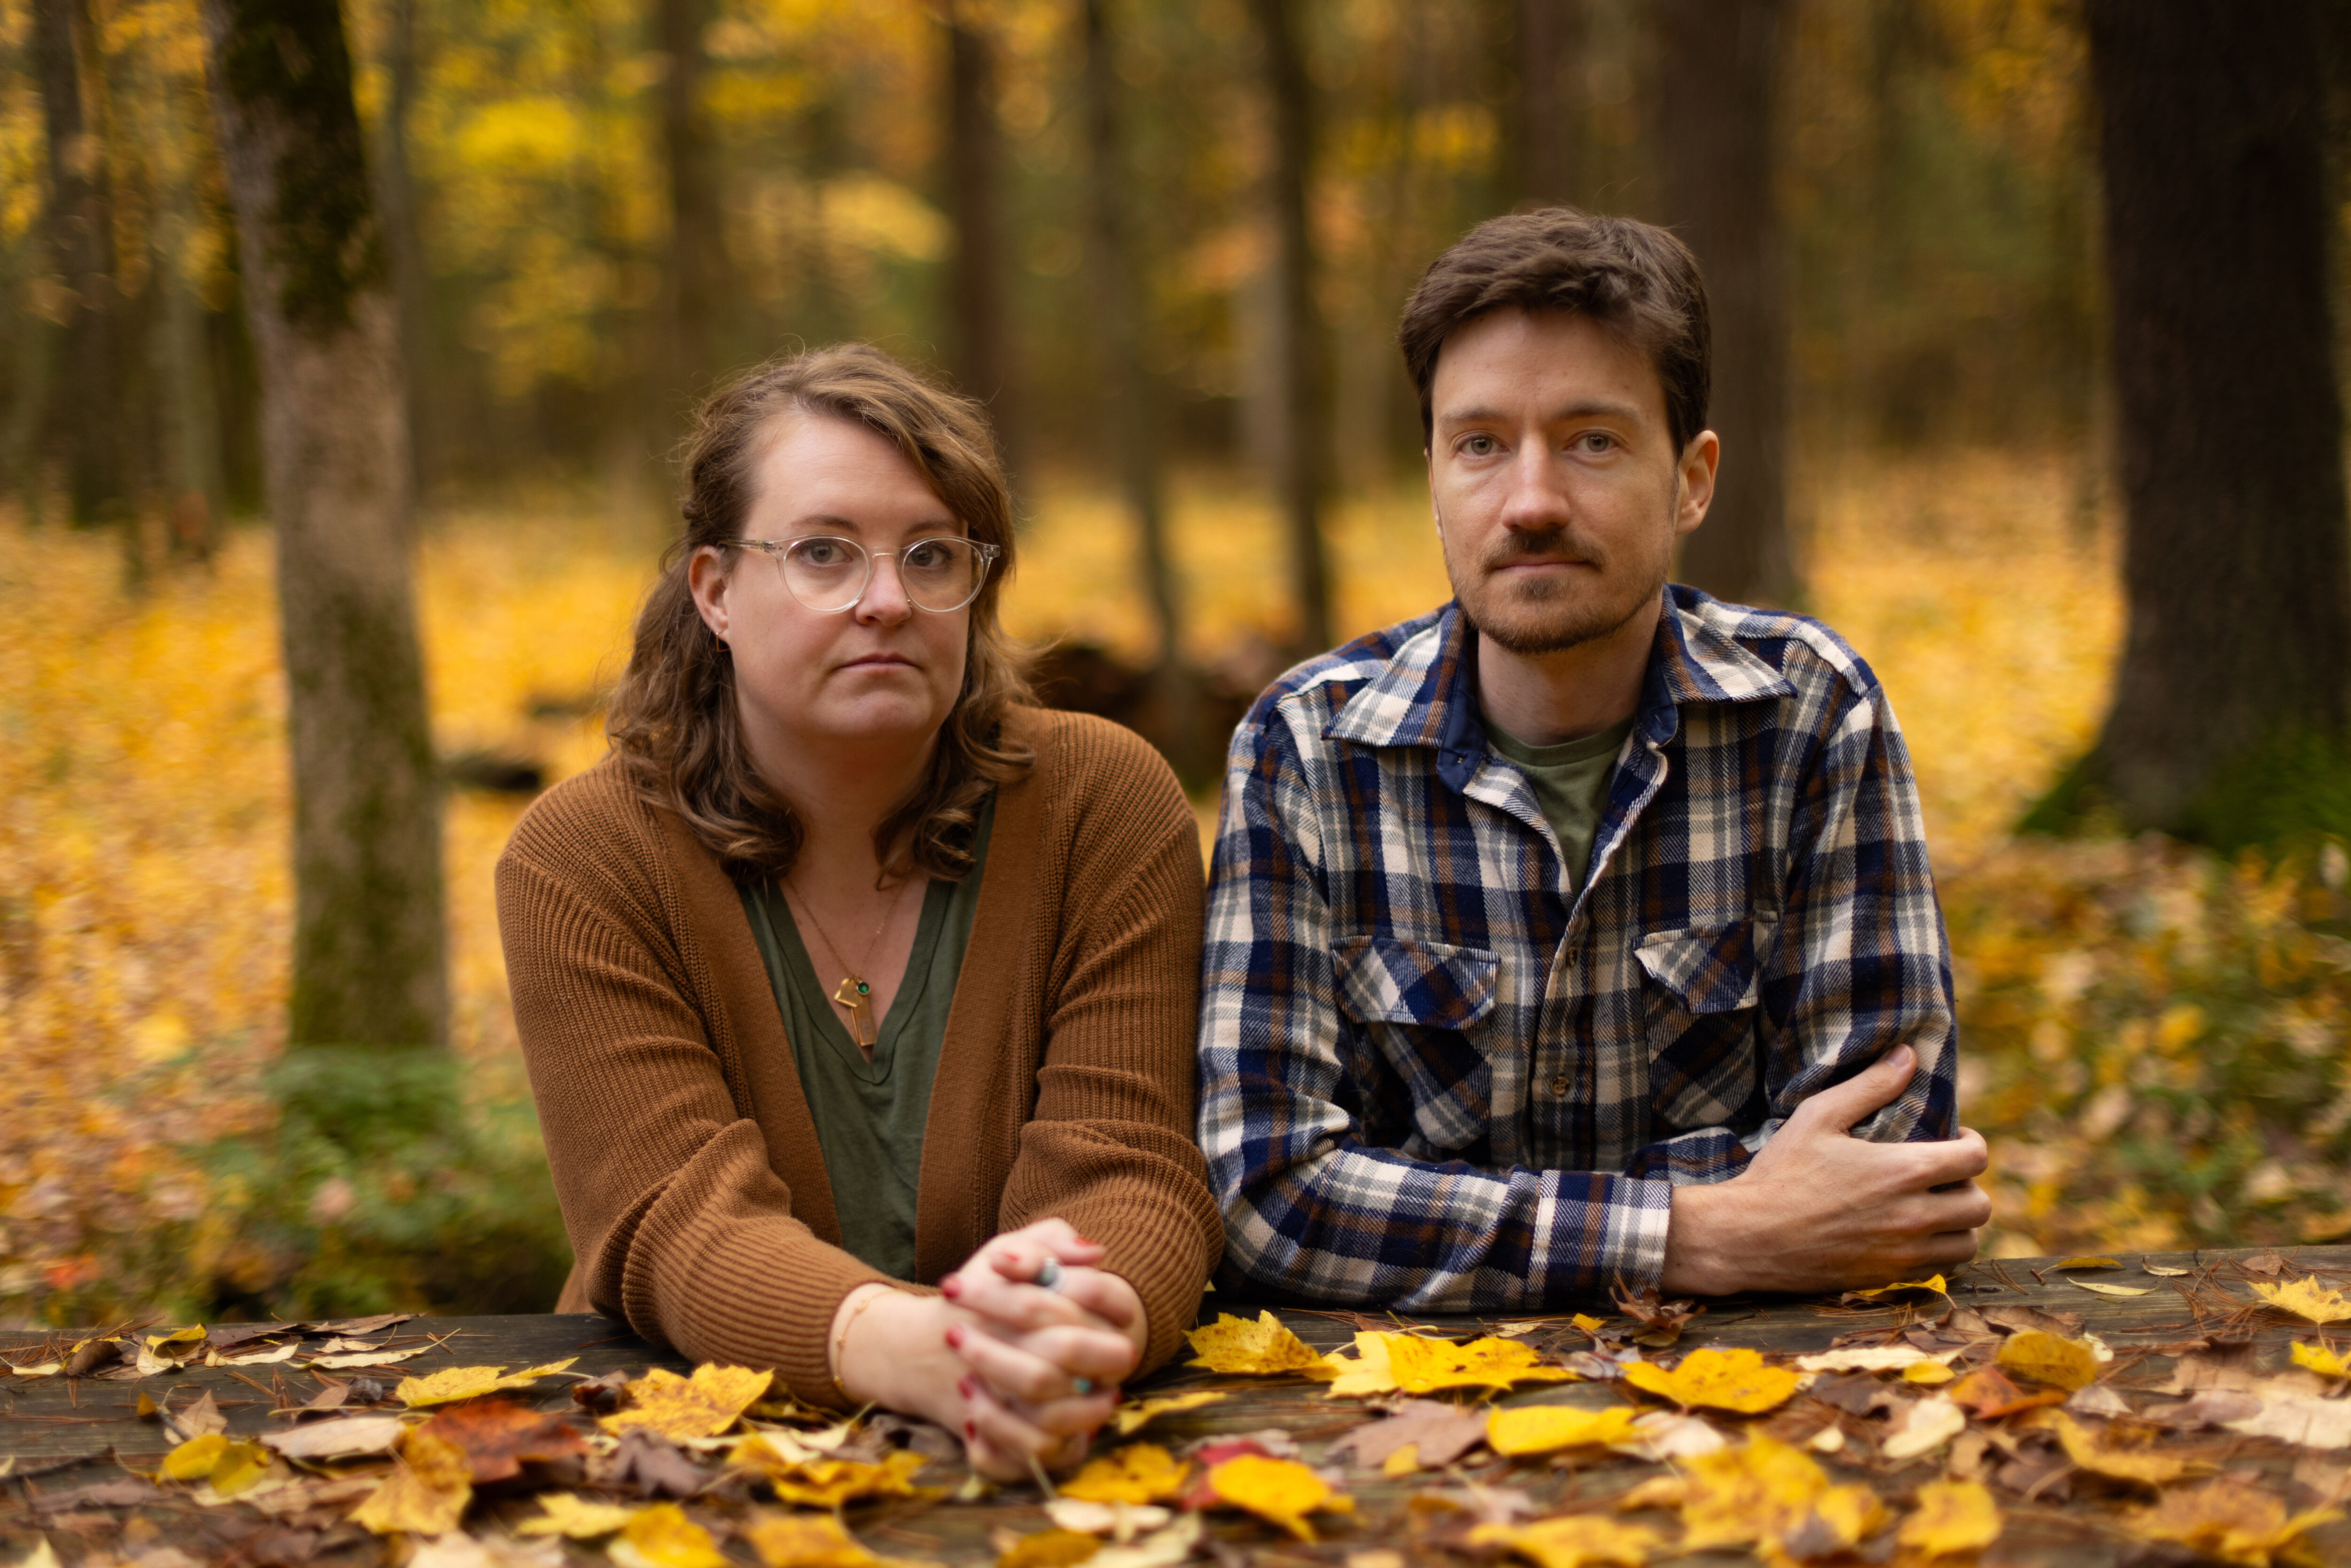 Annica and Peter in the burial forest during fall, surrounded by tress and fallen leaves in a variety of colors